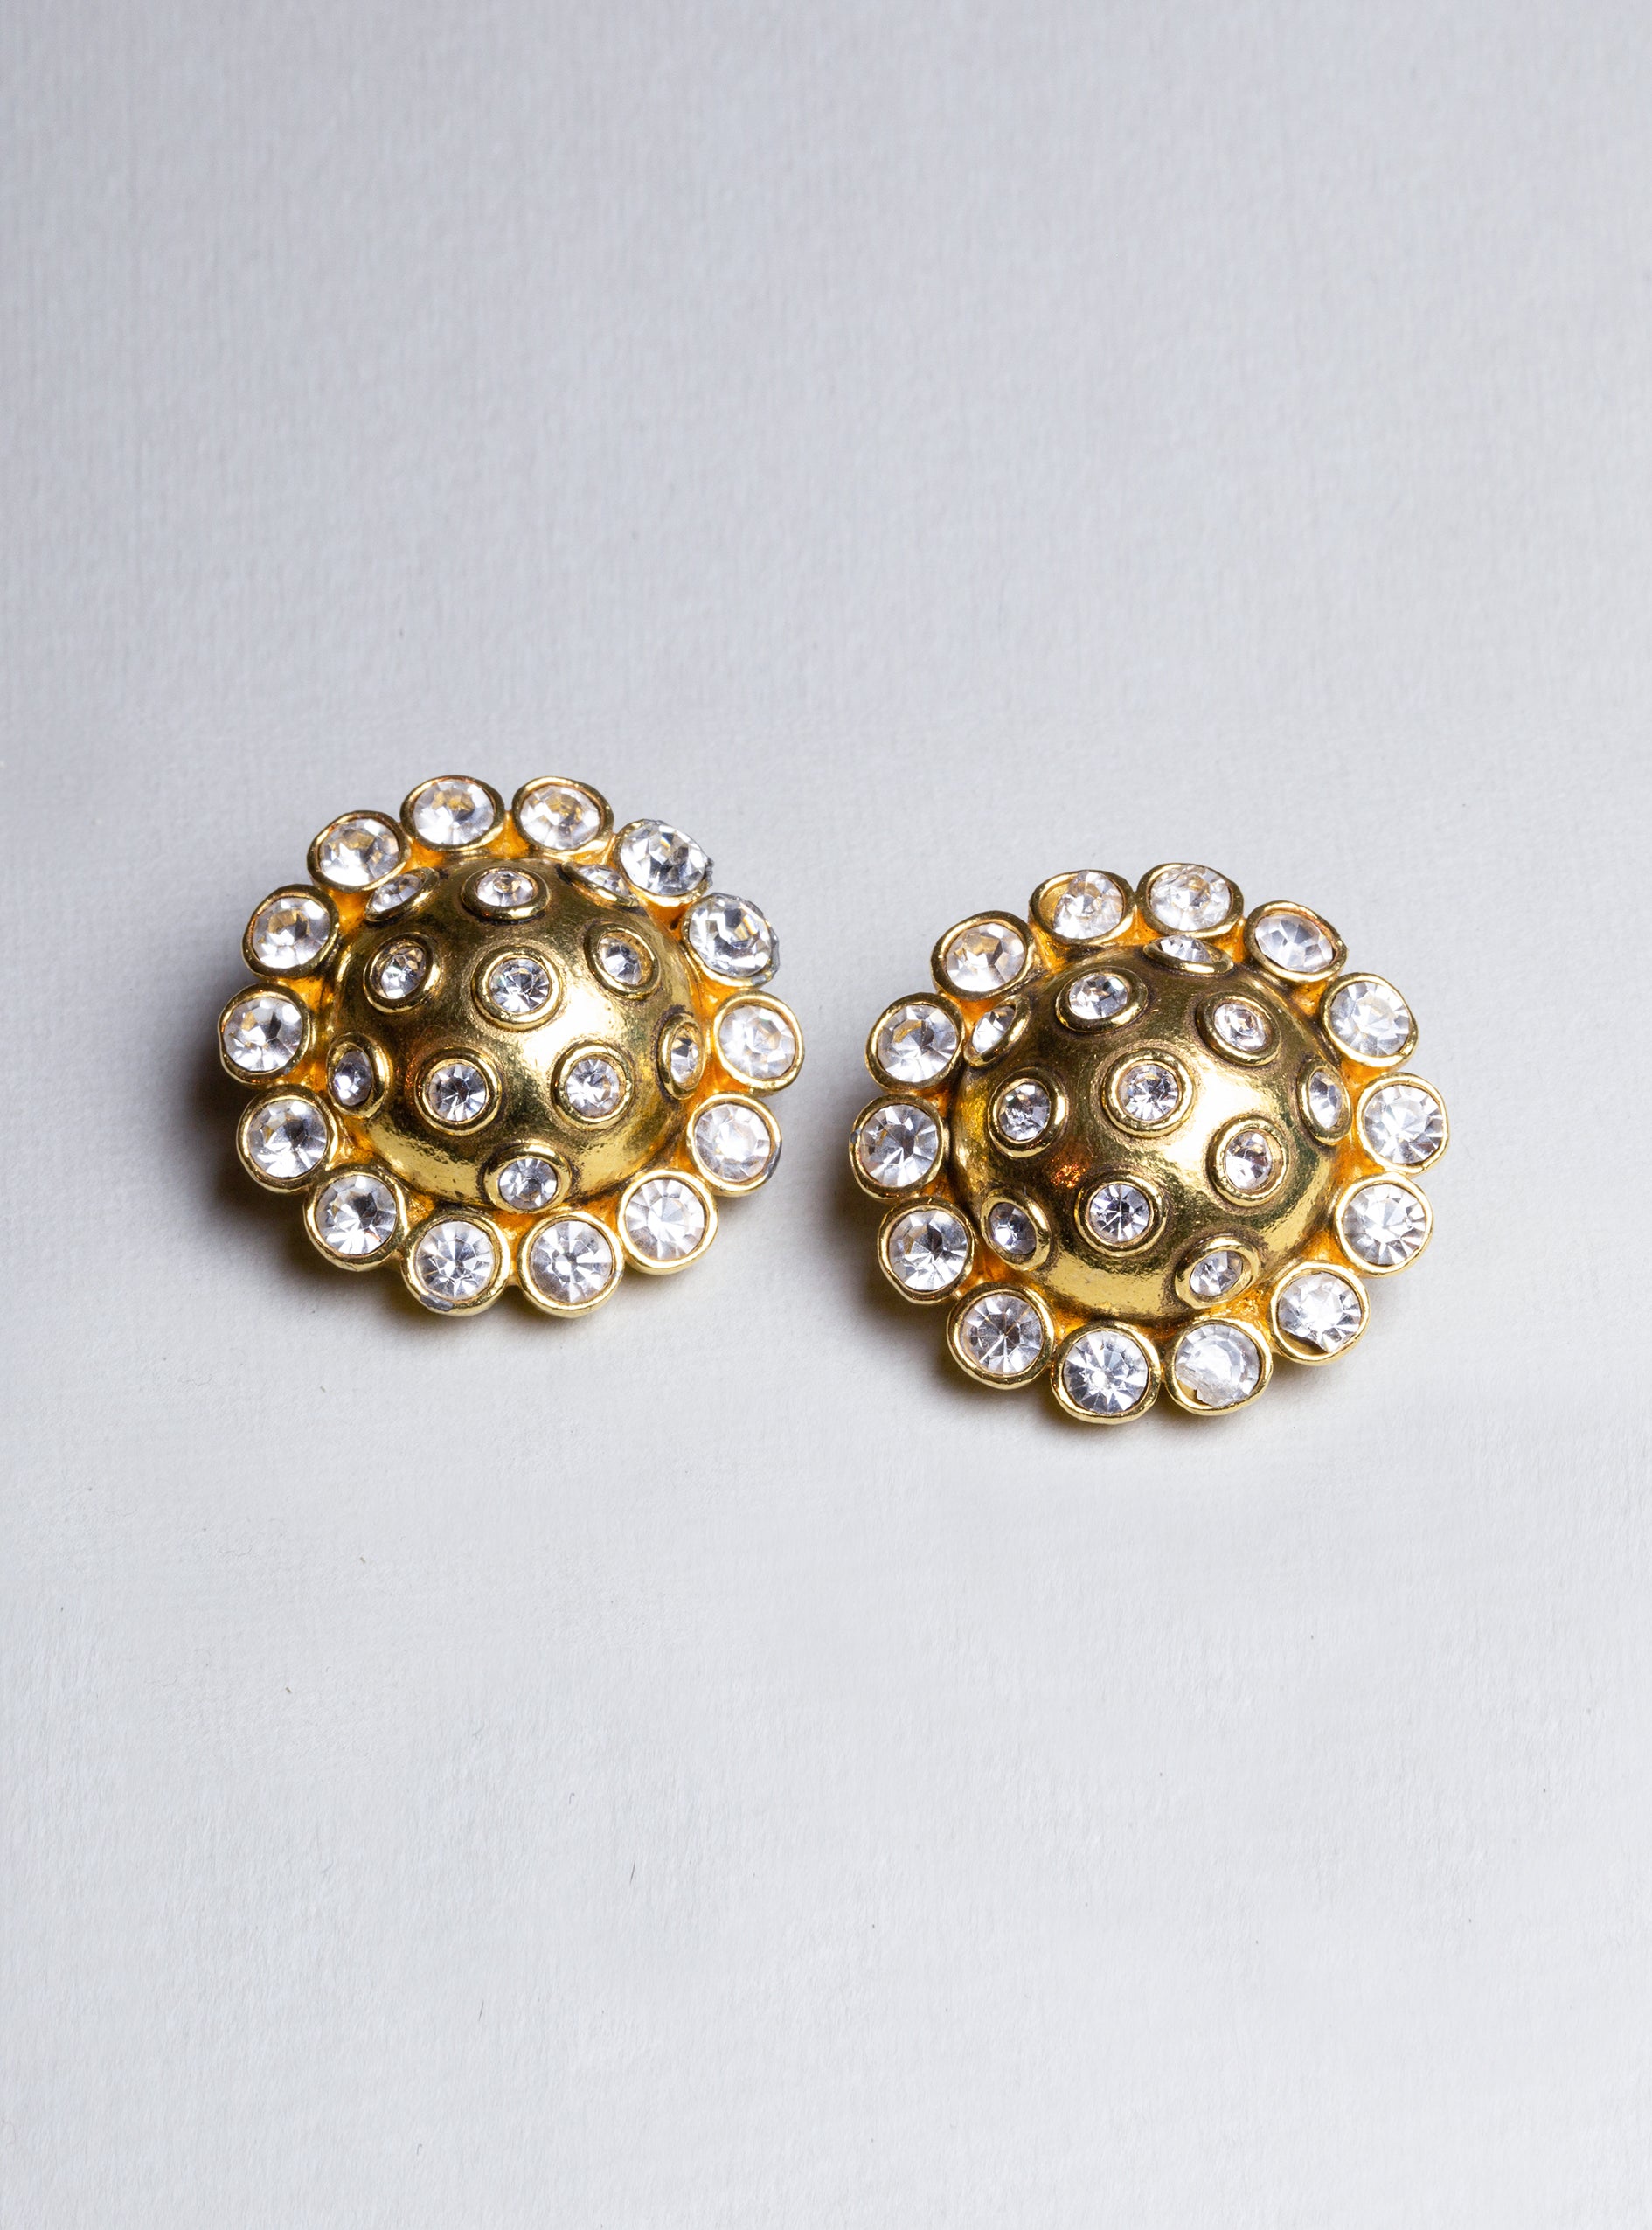 Vintage Chanel Clip-ons Earrings with Crystals